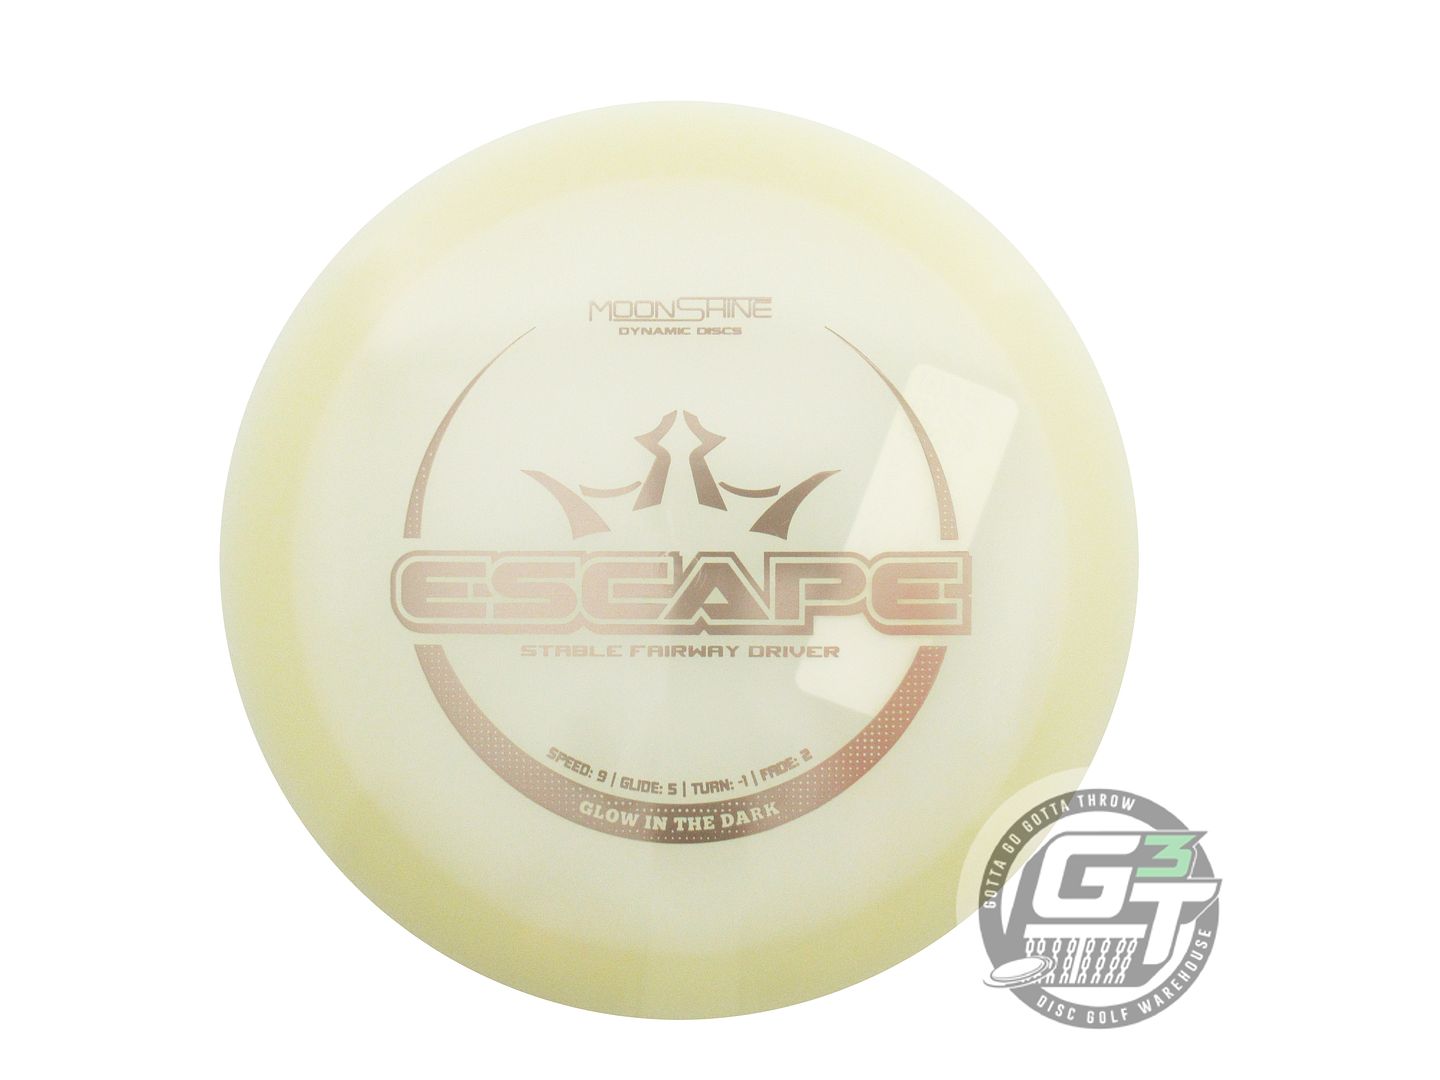 Dynamic Discs Moonshine Glow Lucid Escape Fairway Driver Golf Disc (Individually Listed)